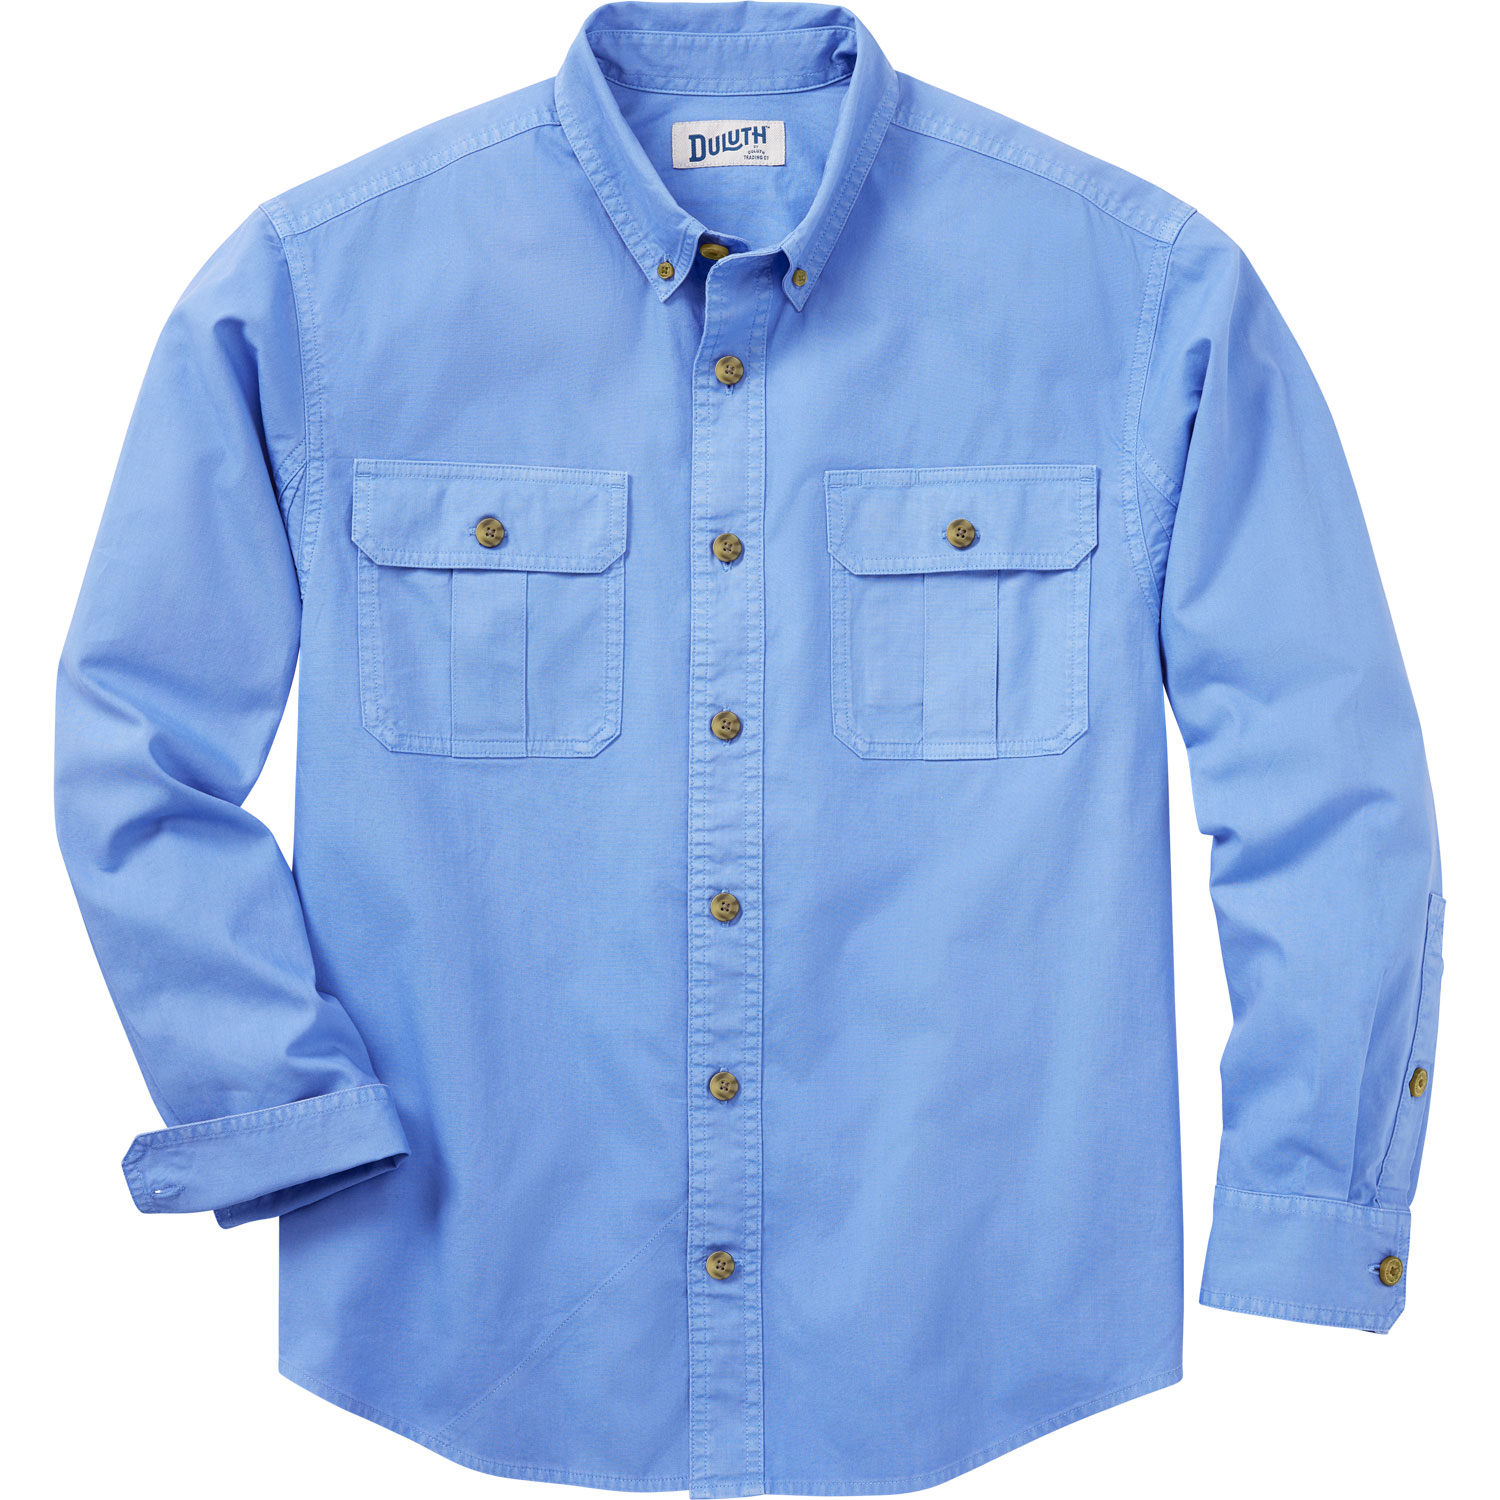 Men's Duluth Untucked Great Lakes Washed Shirt